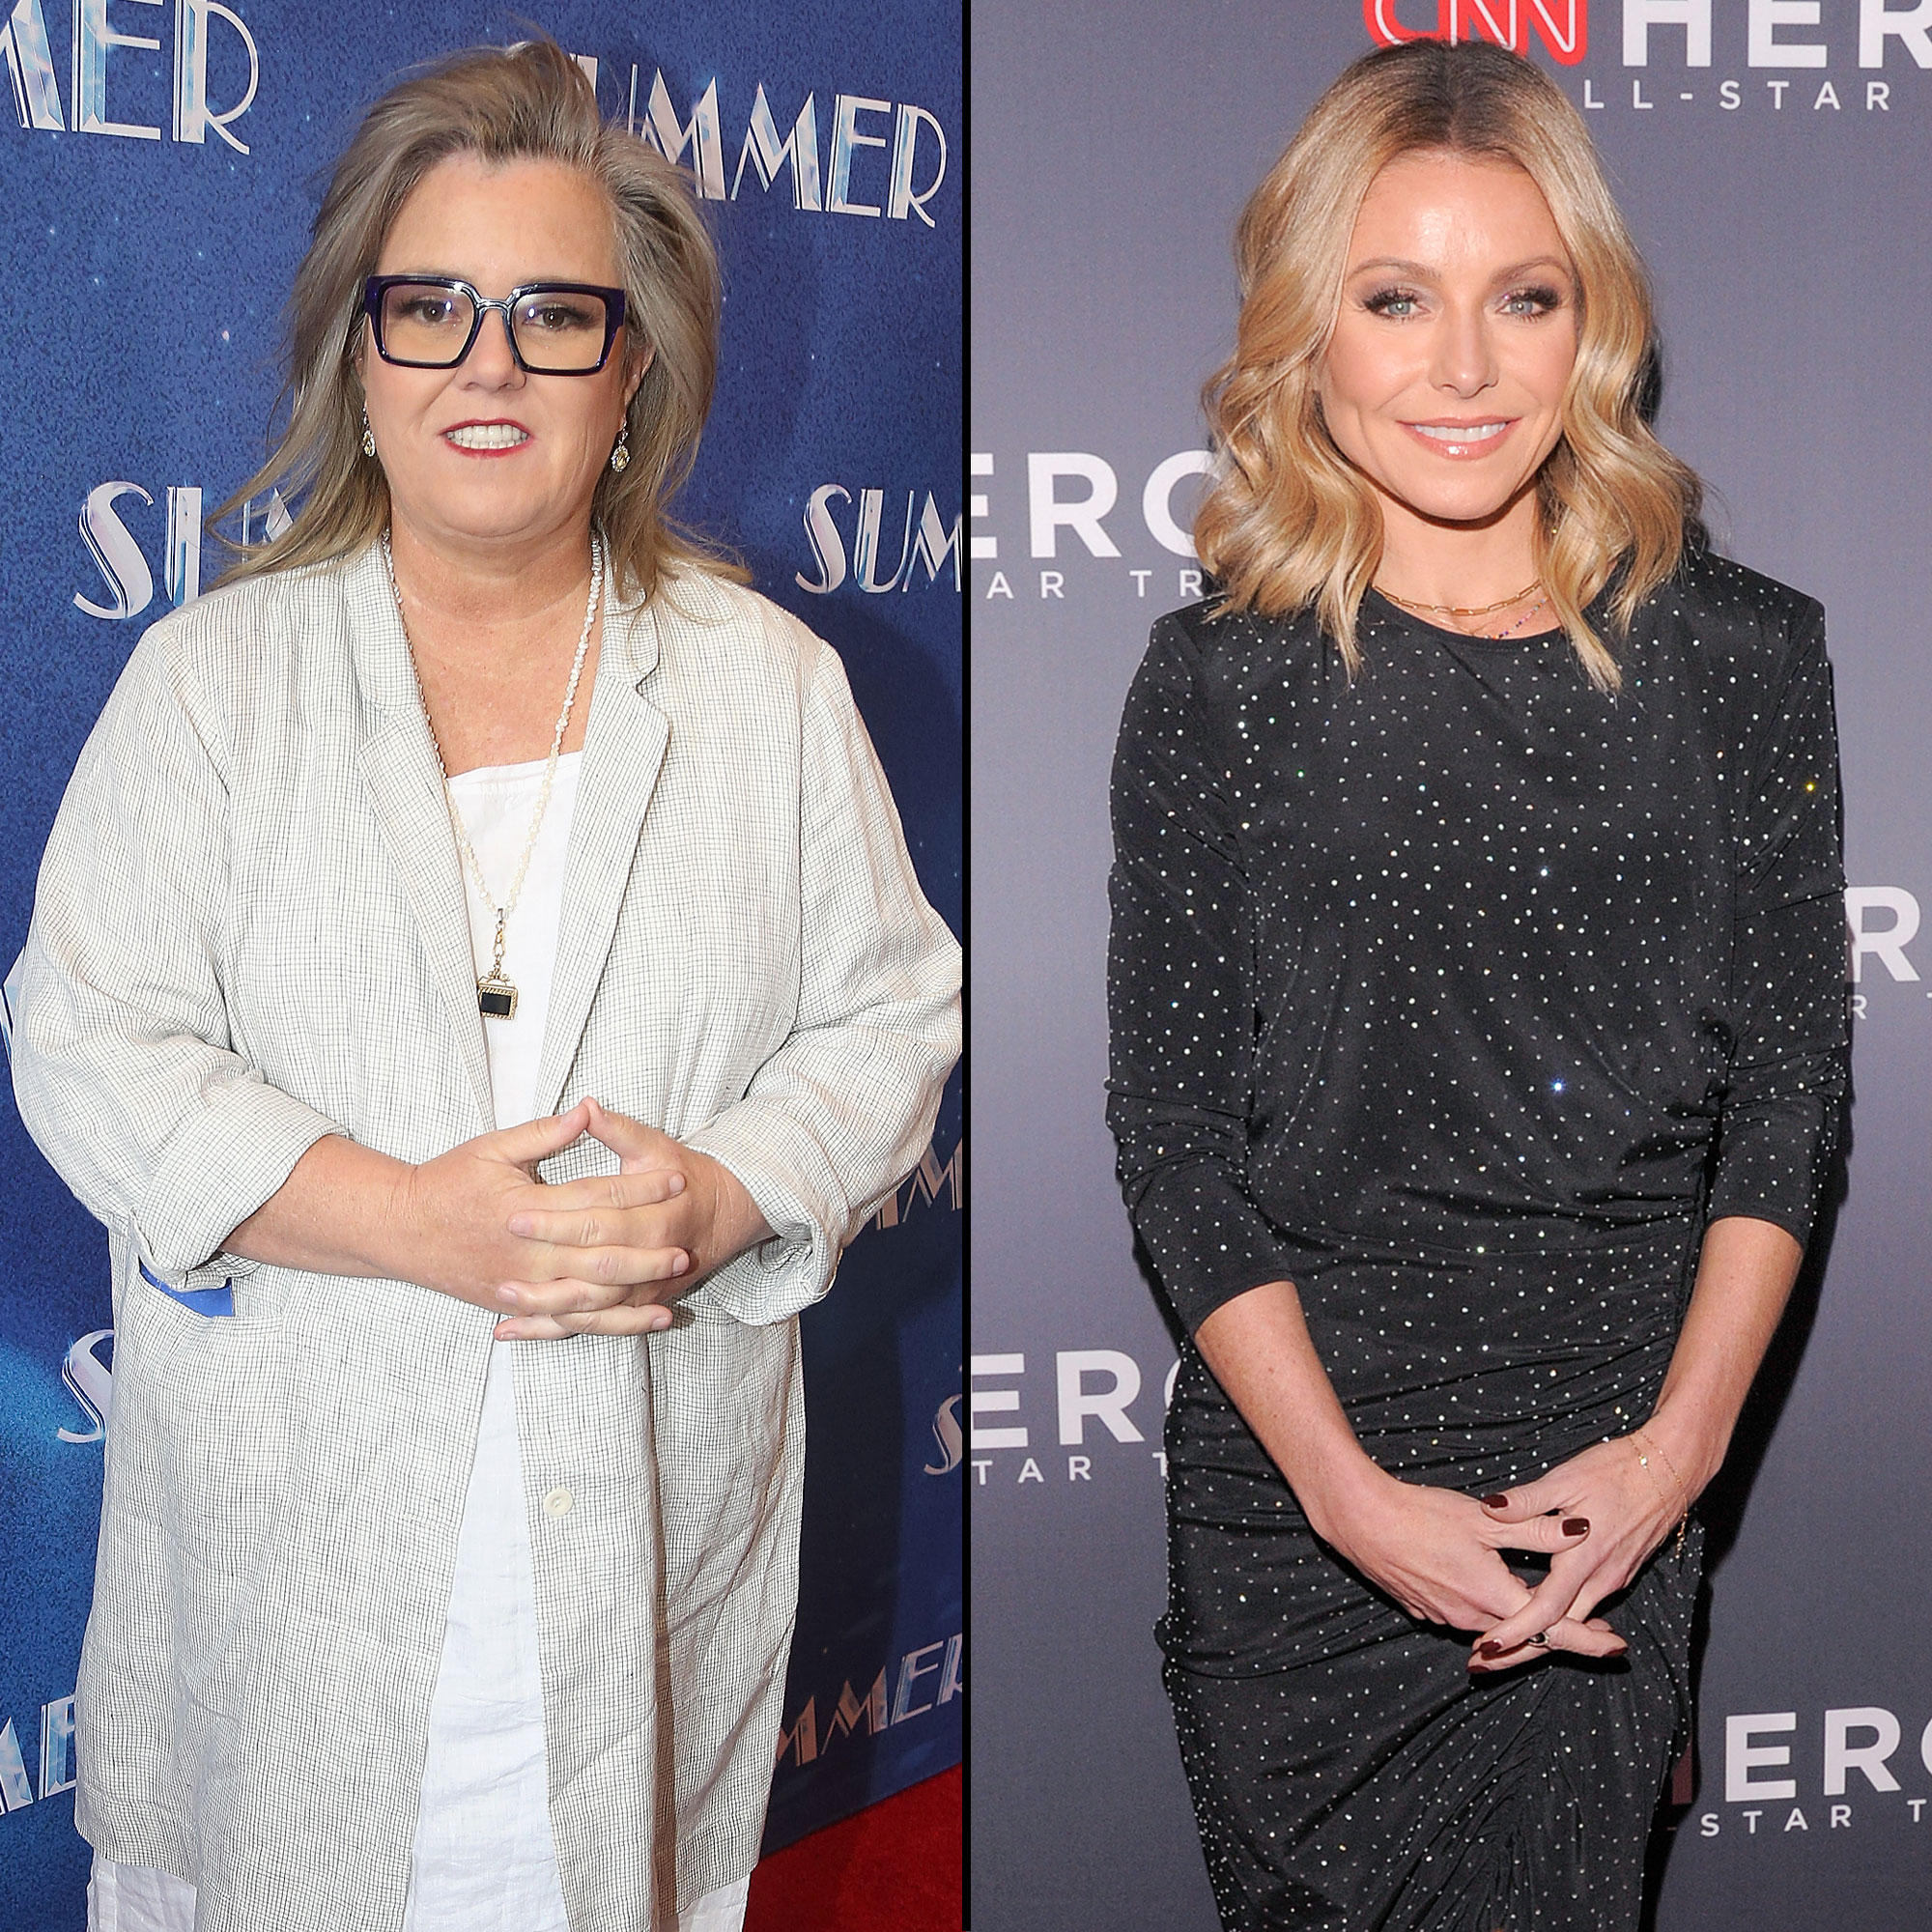 Rosie ODonnell Apologized to Kelly Ripa for Gay-Bashing Remark image